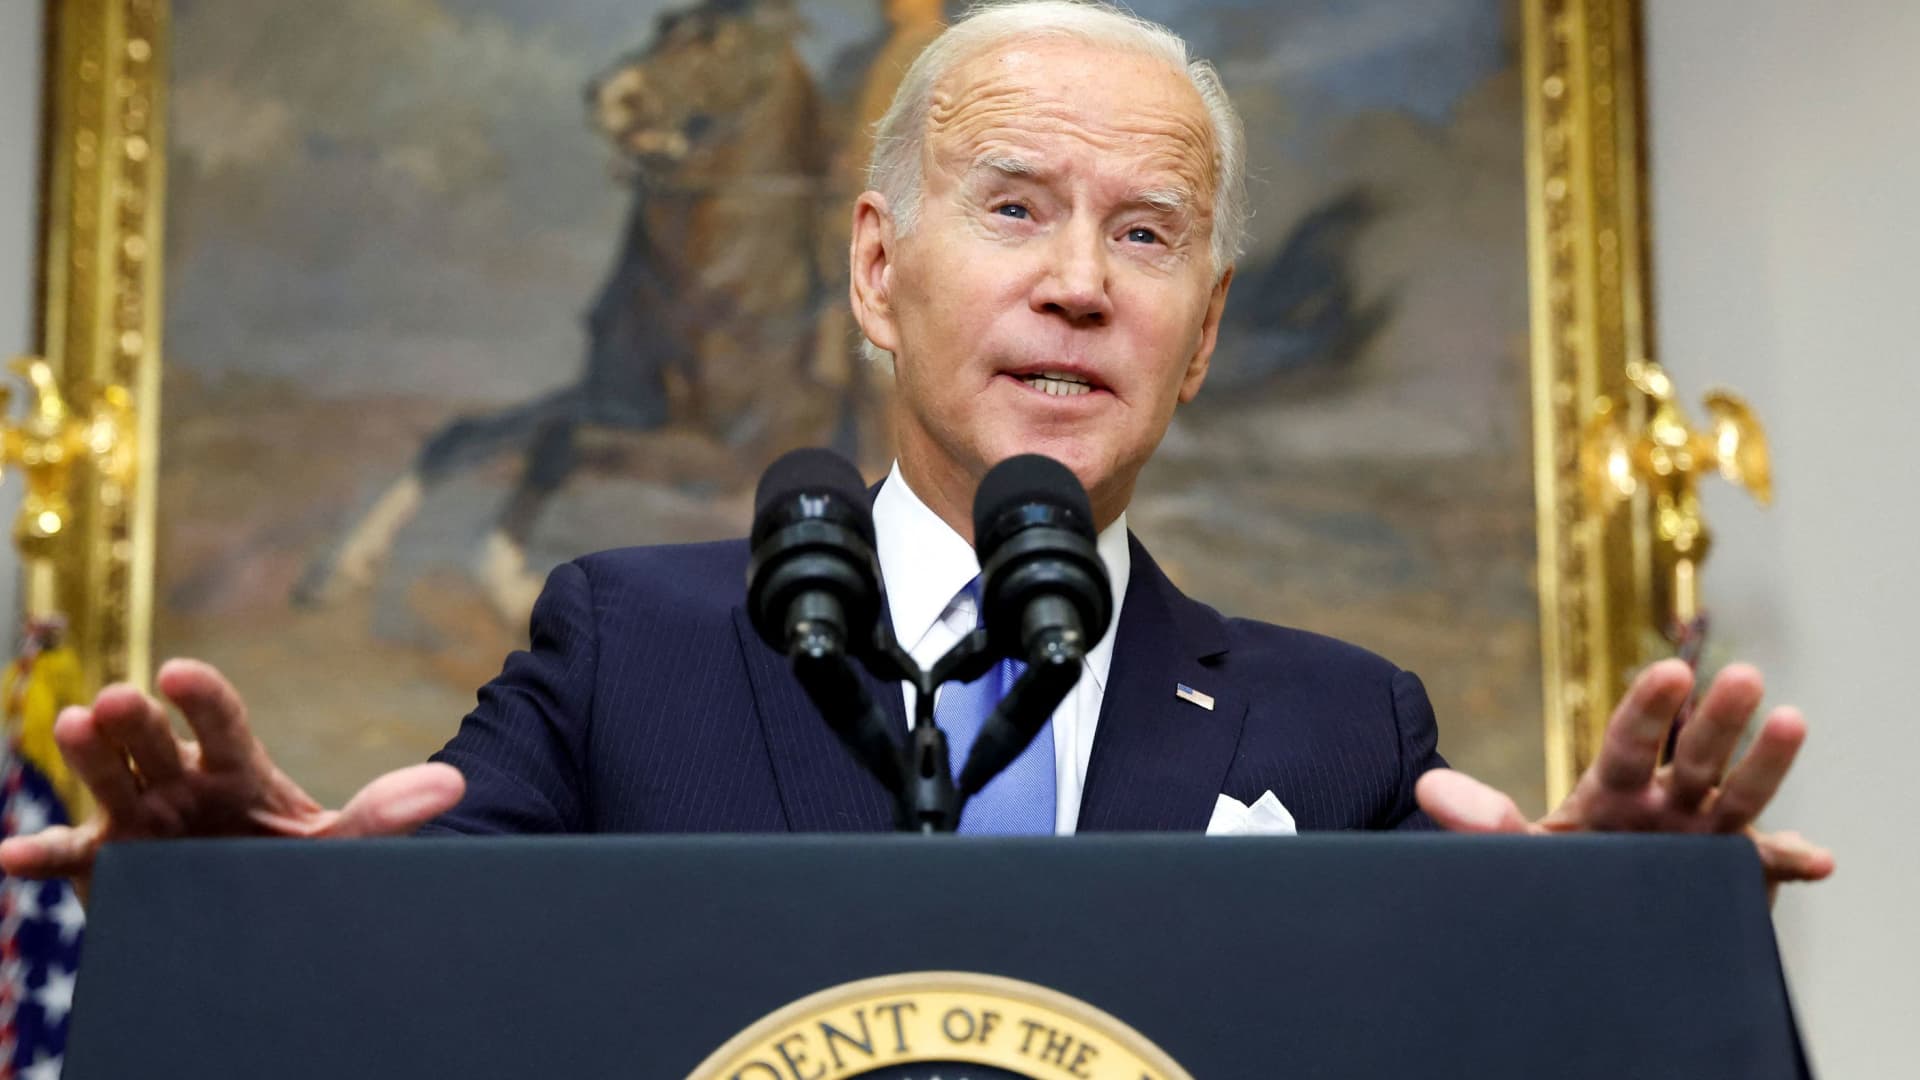 U.S. President Joe Biden makes remarks about Russian President Vladimir Putin's comments on the military conflict in Ukraine after delivering remarks on the federal response to Hurricane Ian at the White House in Washington, September 30, 2022.